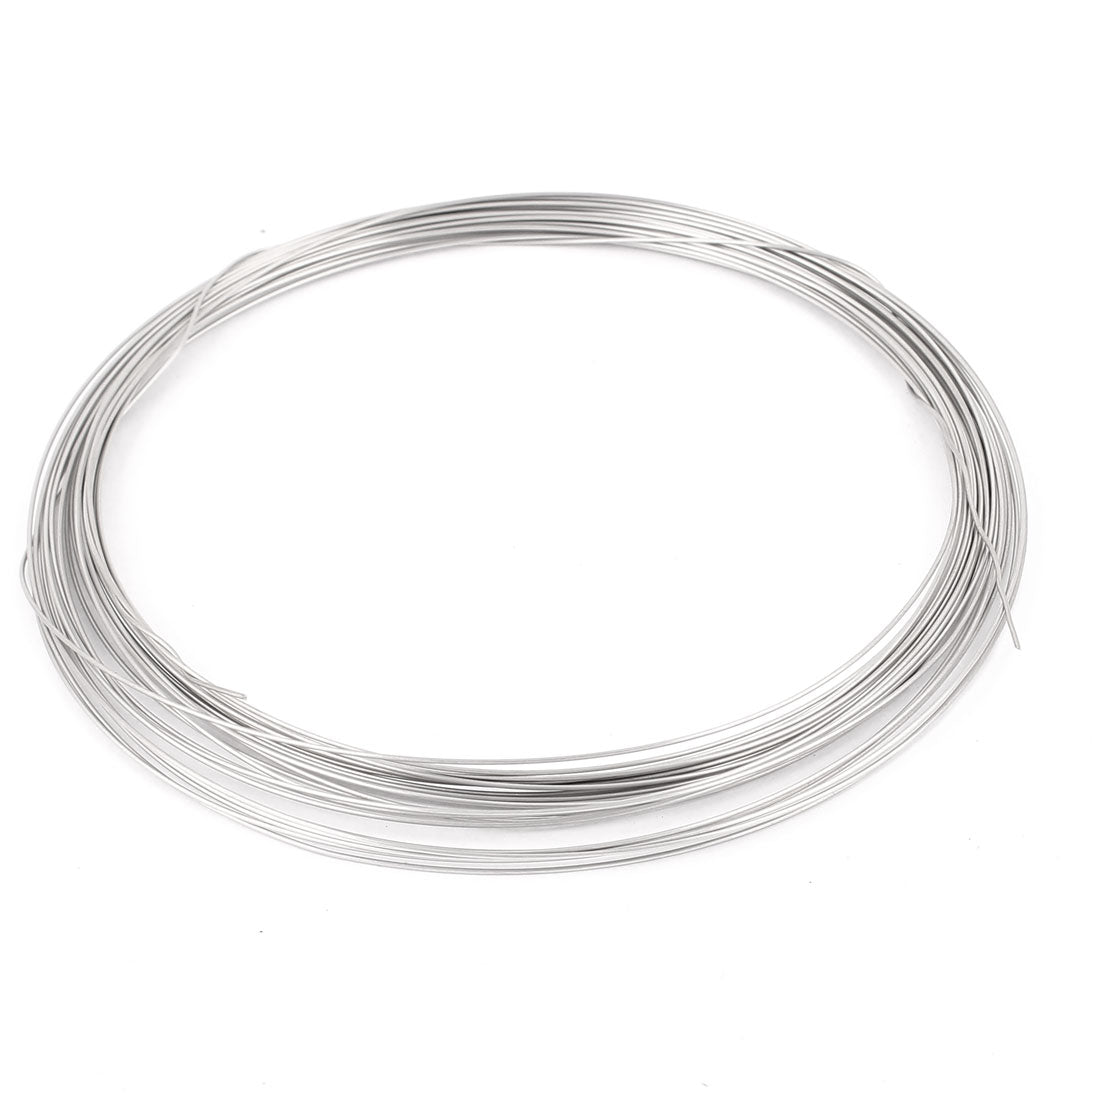 uxcell Uxcell Nichrome 80 0.7mm 21 Gauge AWG  Heat Wire 33ft Roll Heating Element